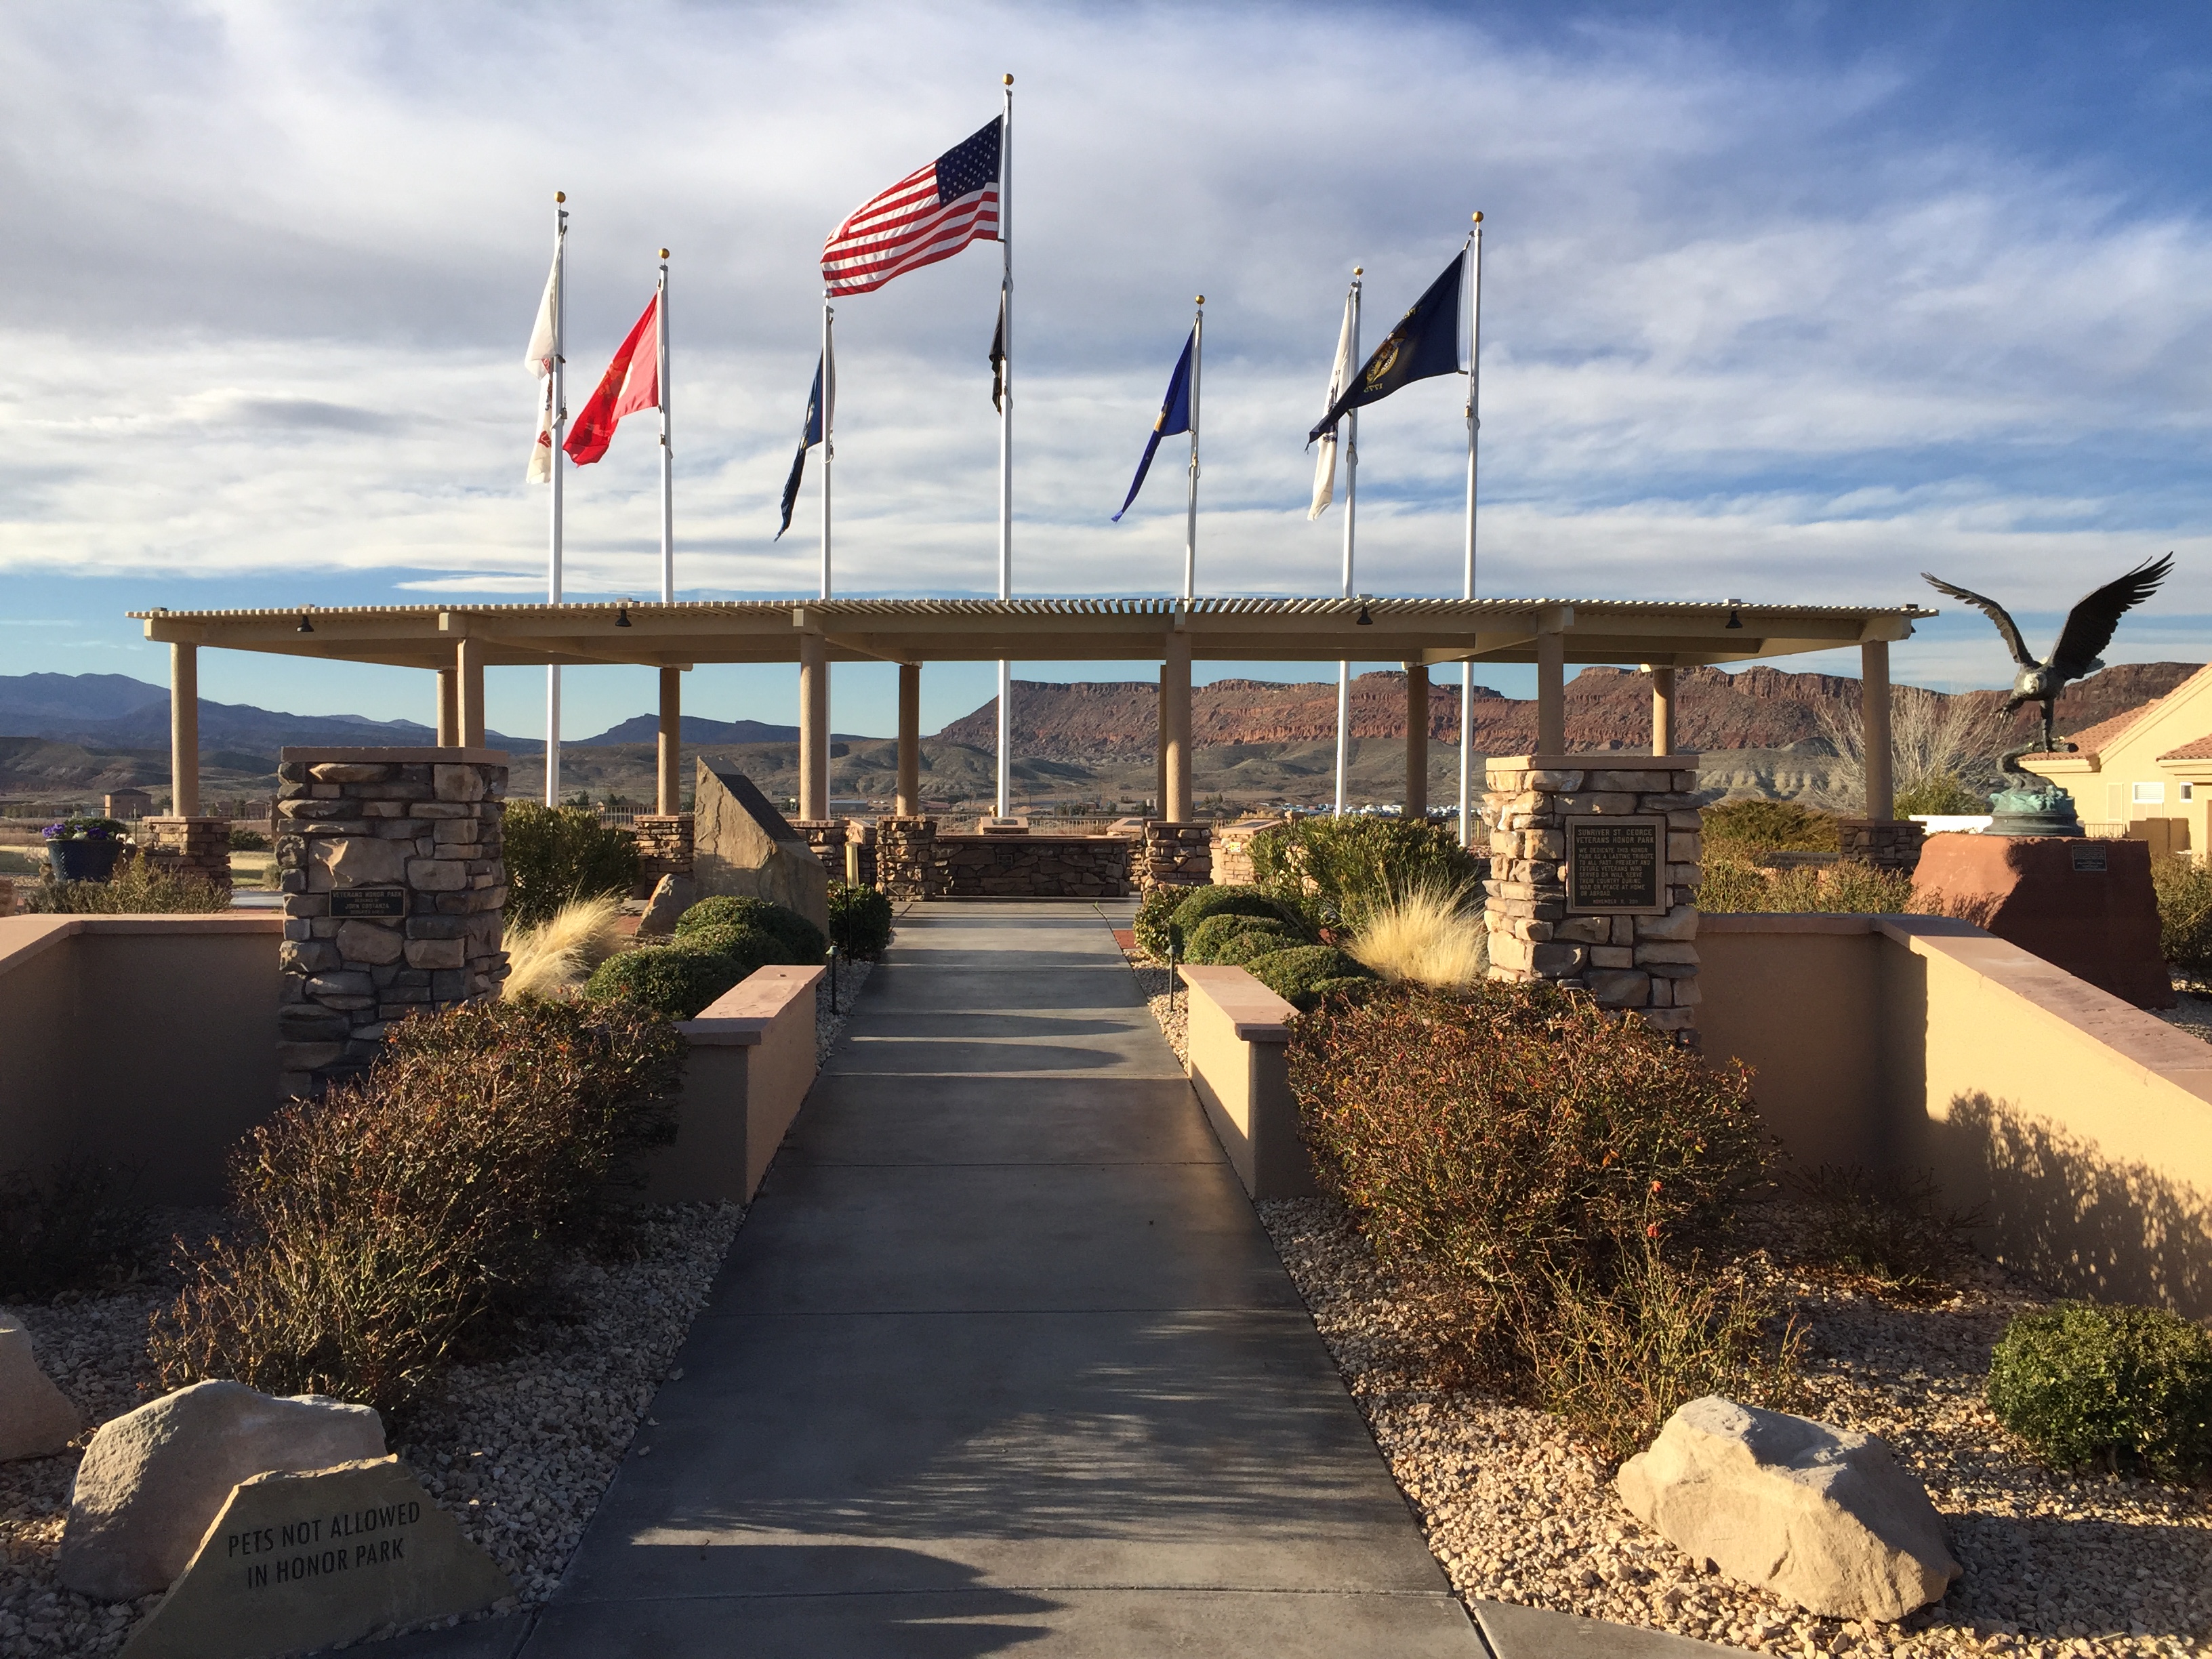 The main entrance to the SunRiver St. George Veterans Honor Park